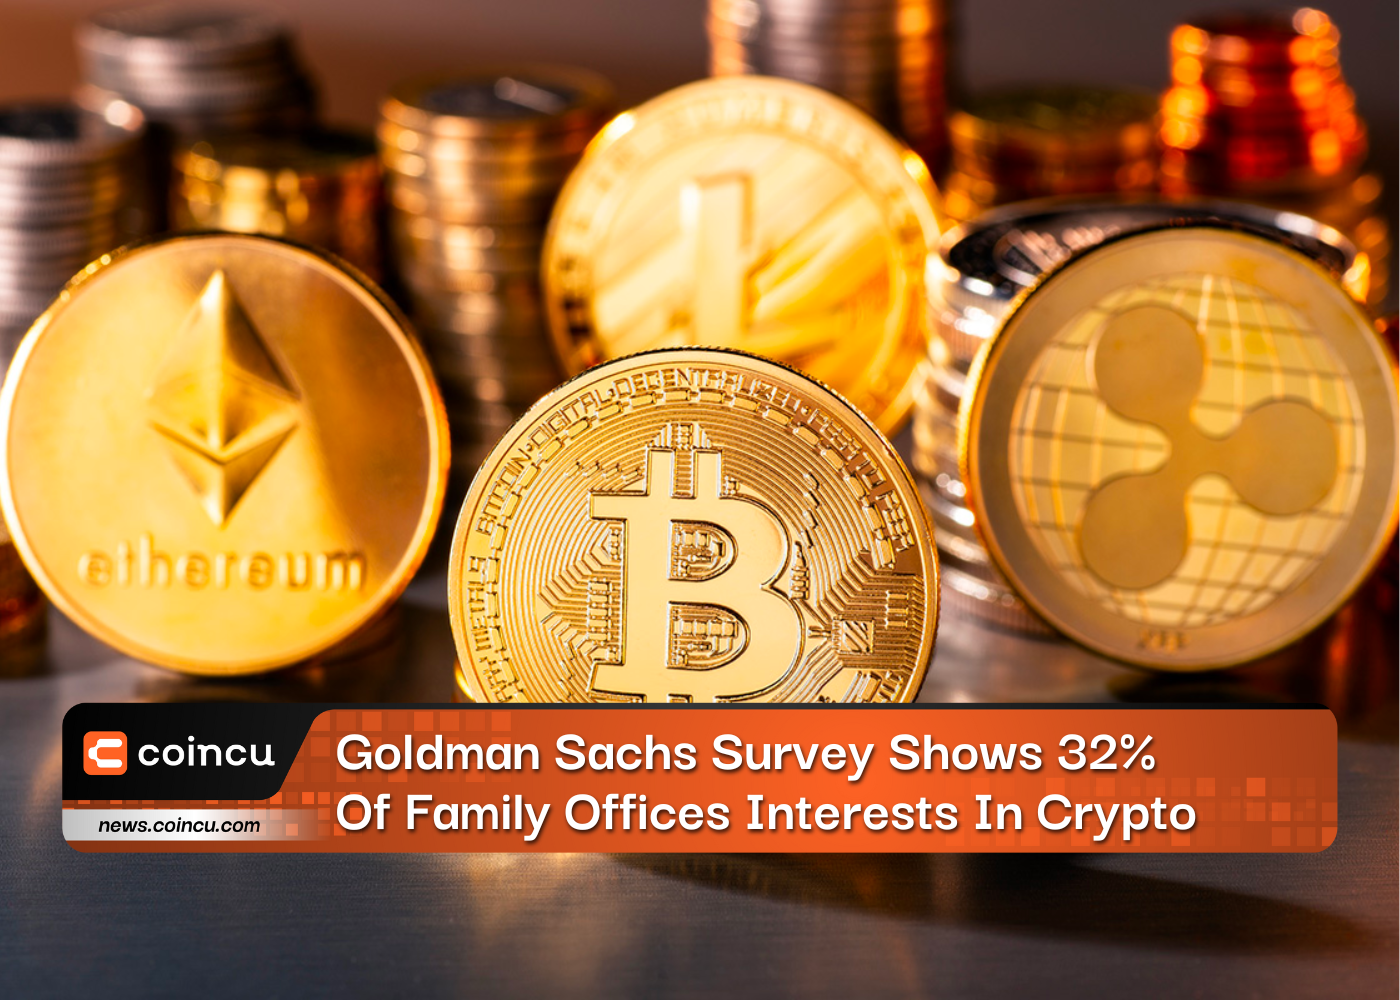 Goldman Sachs Survey Shows 32% Of Family Offices Interests In Crypto